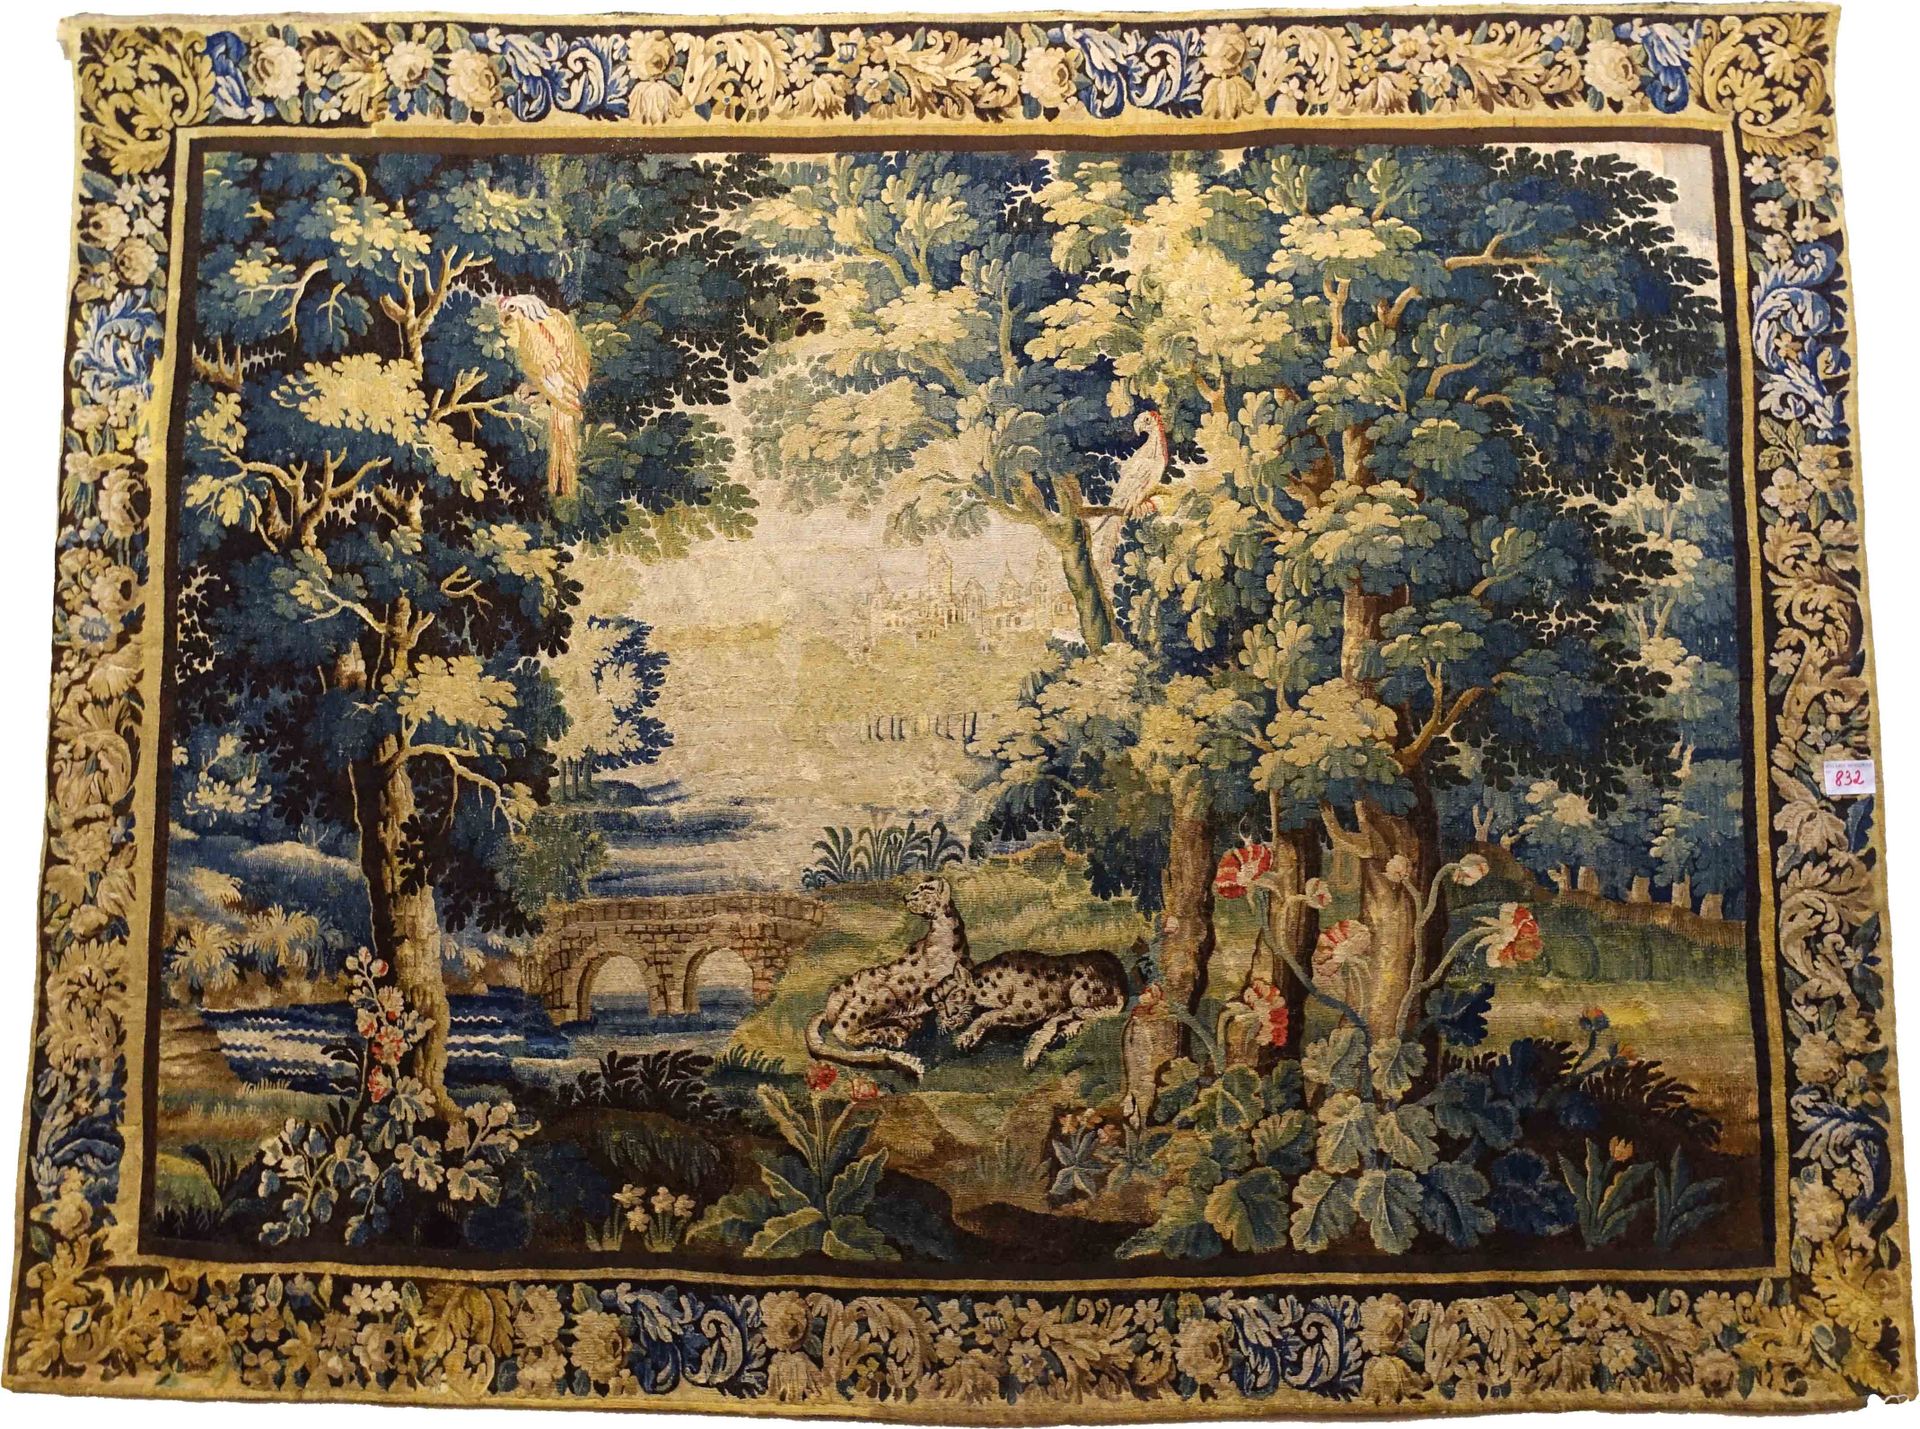 Tapisserie d’Audenarde. It shows a pair of leopards in a garden with trees, and &hellip;